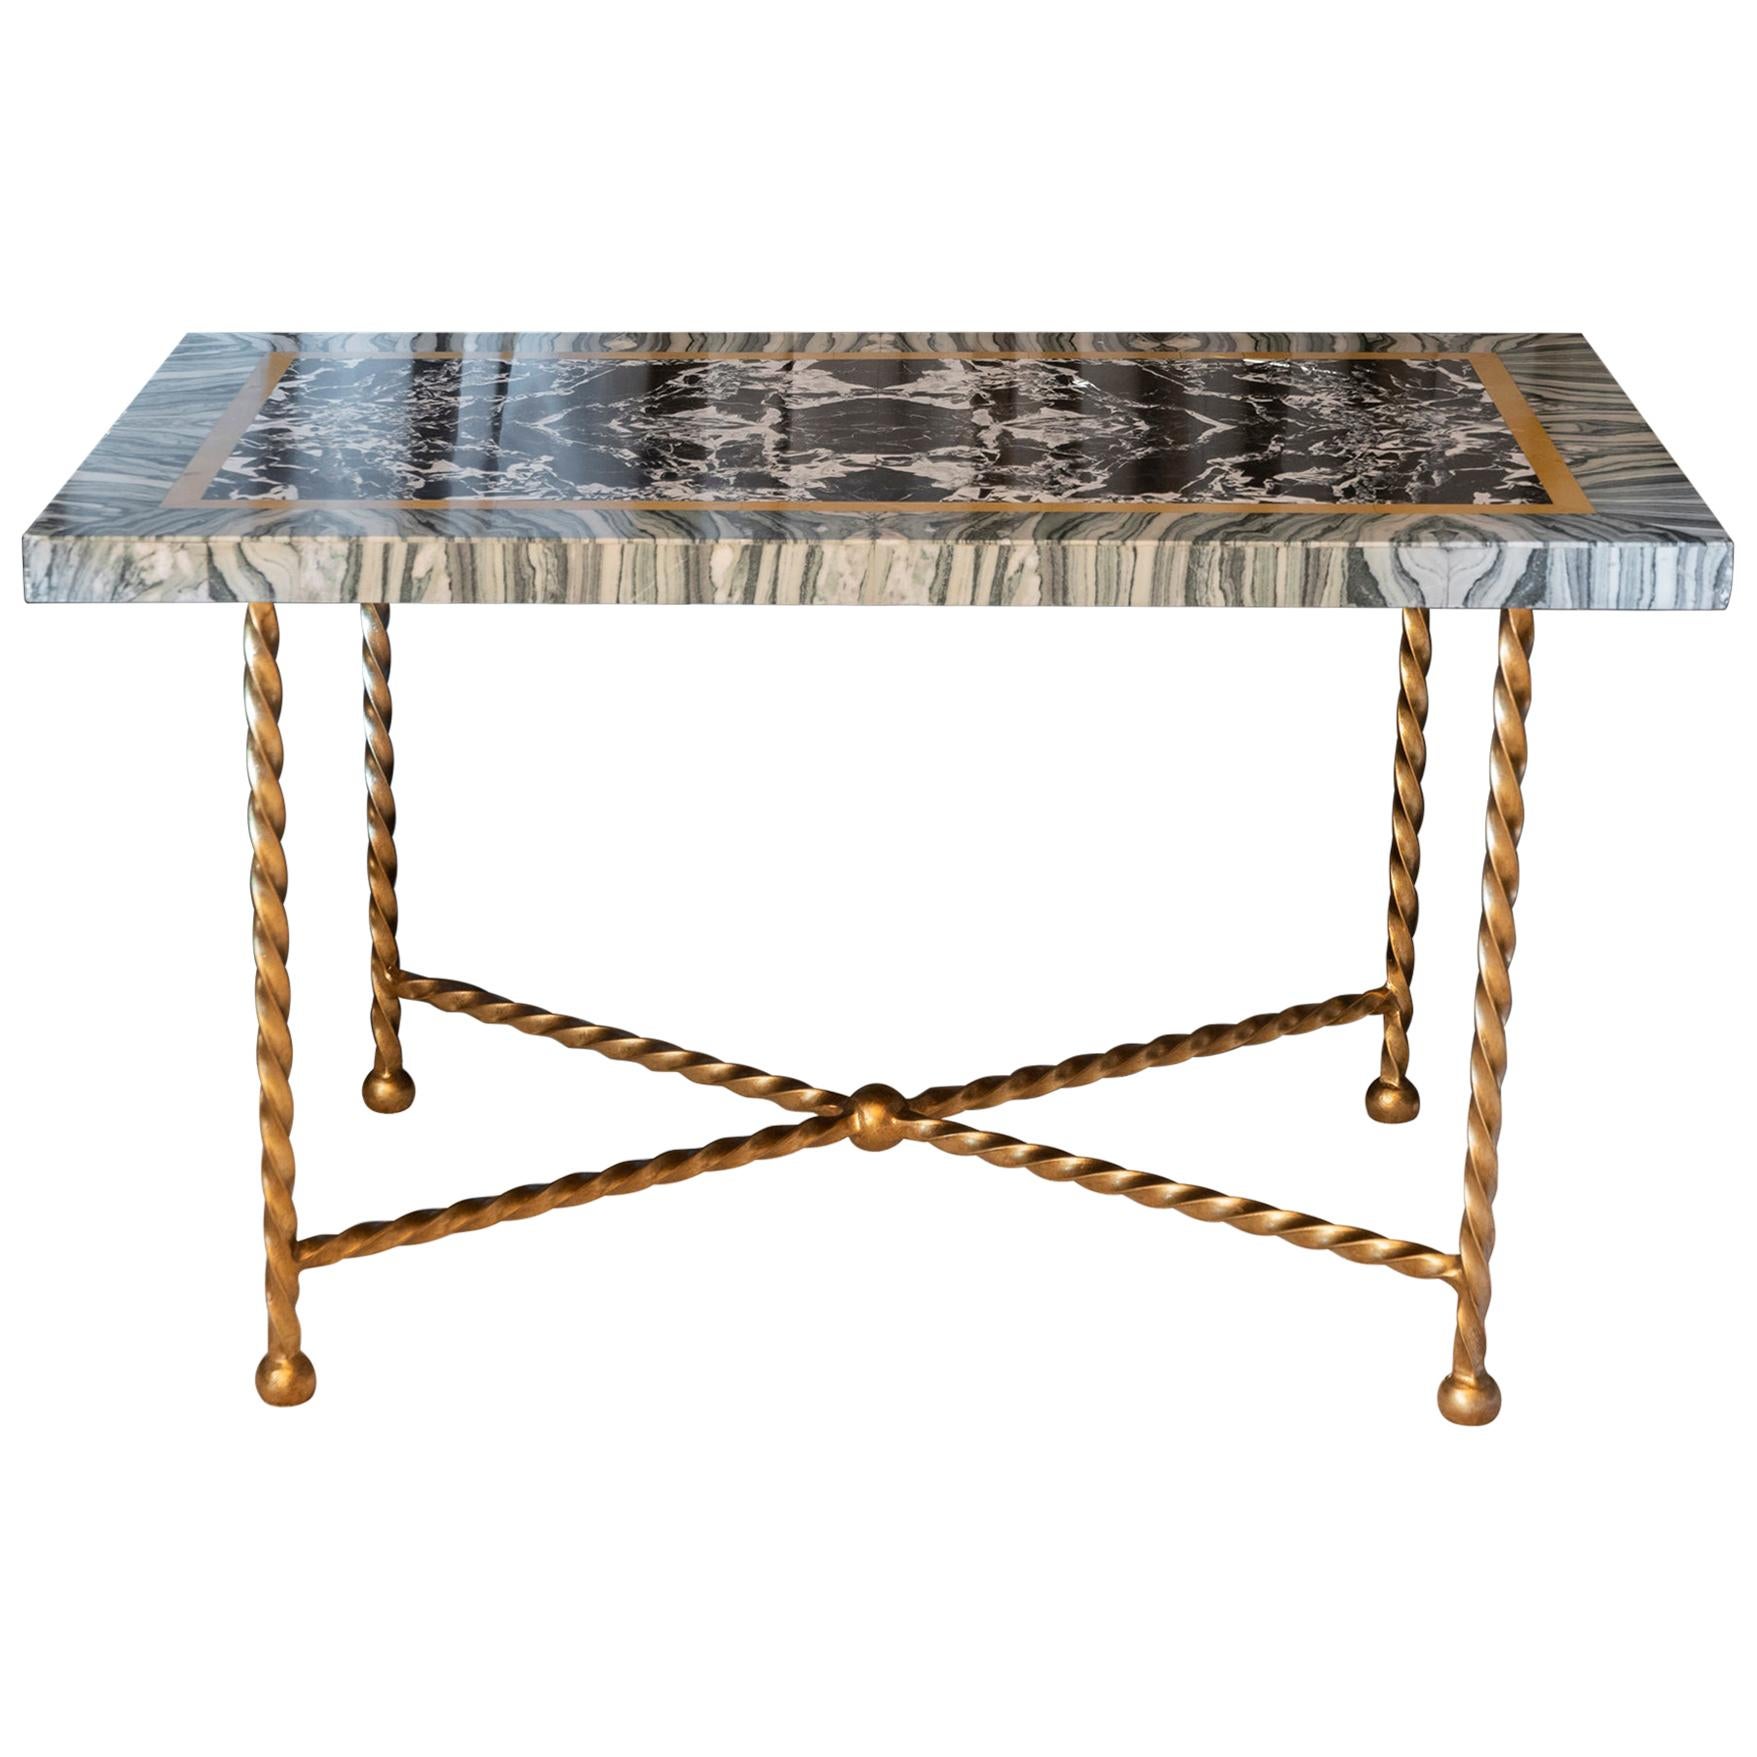 Late 19th Century Italian Marble Polychrome and Gilded Steel Base Desk/Console